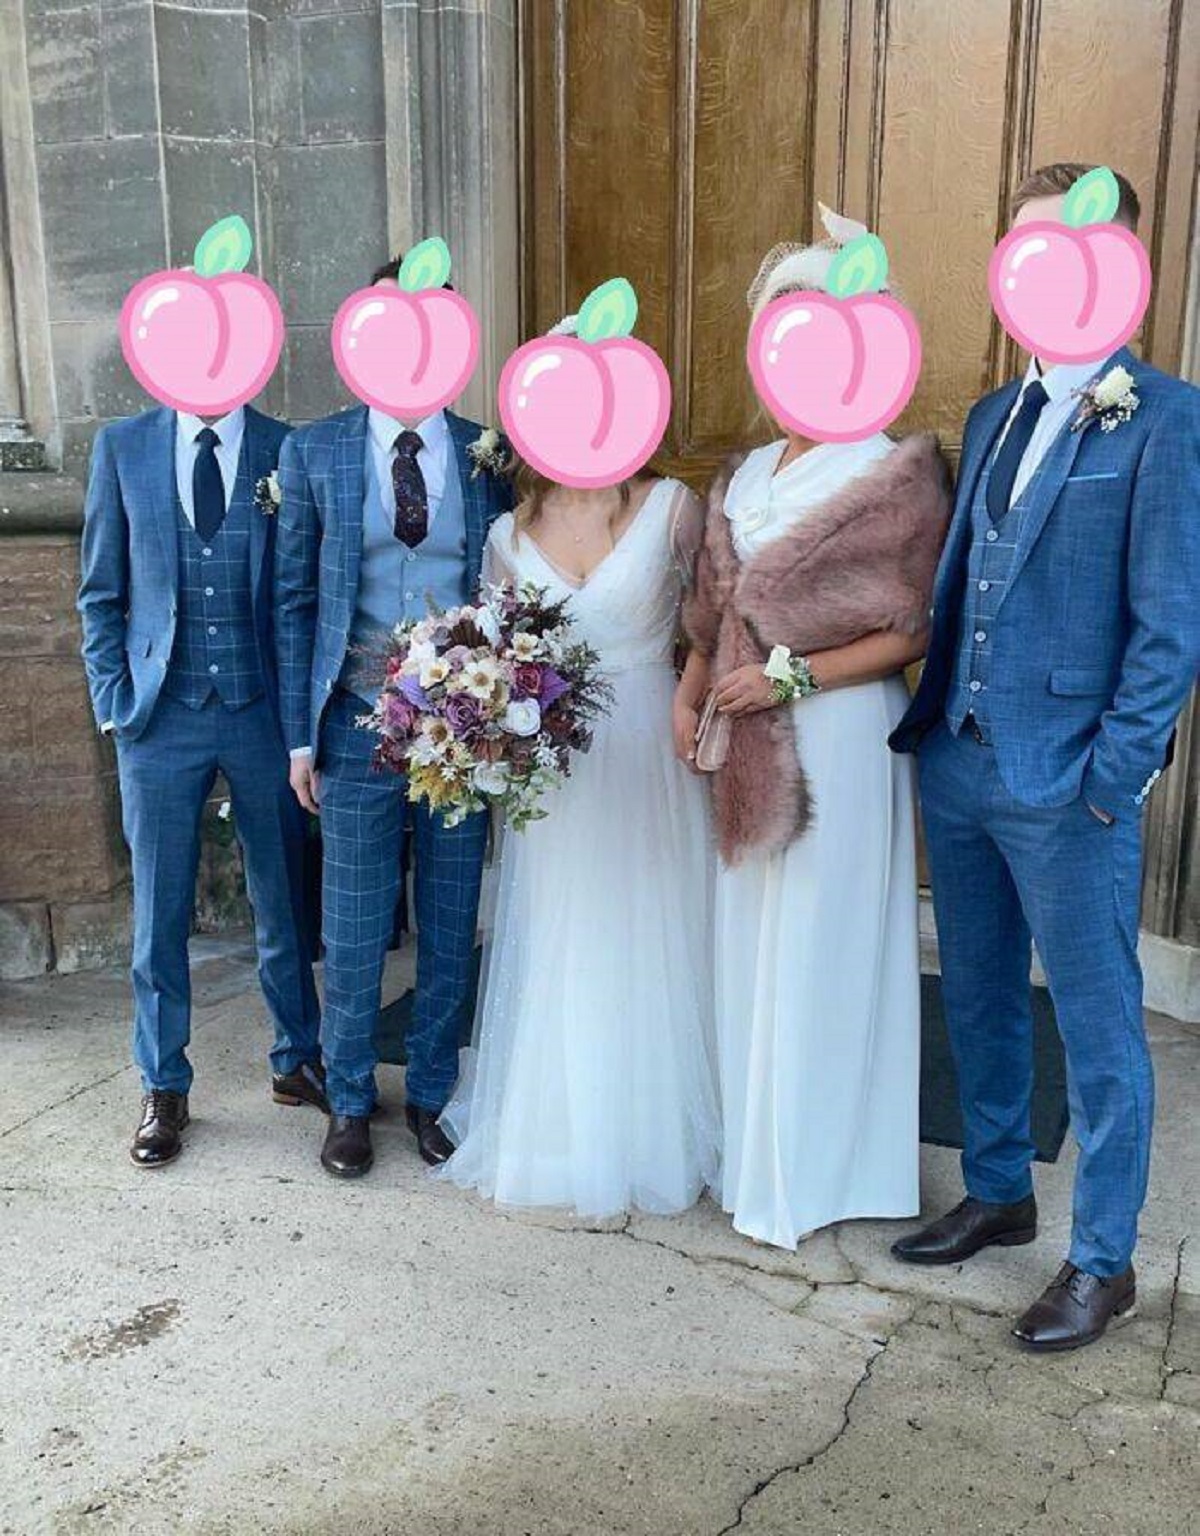 "Lady In The Fur Stole Is The Brides Mum. She Could Have Worn Literally Any Other Colour"